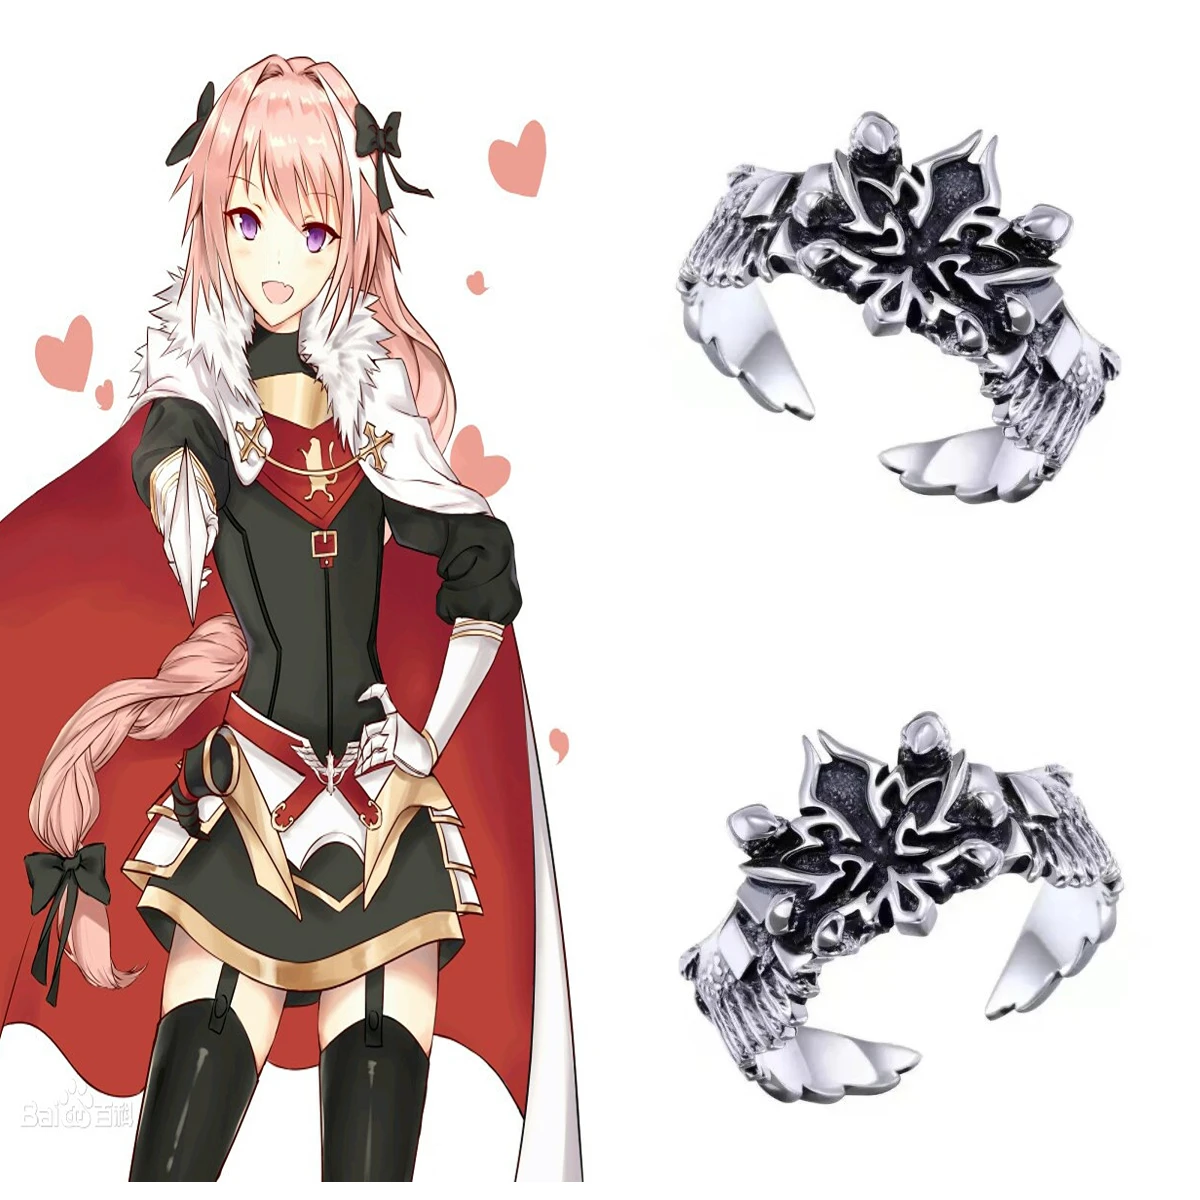 Anime Fate/Apocrypha Ring Cosplay Astolfo Unisex Adjustable Alloy Ring Jewelry Gift Clothing Accessories Props